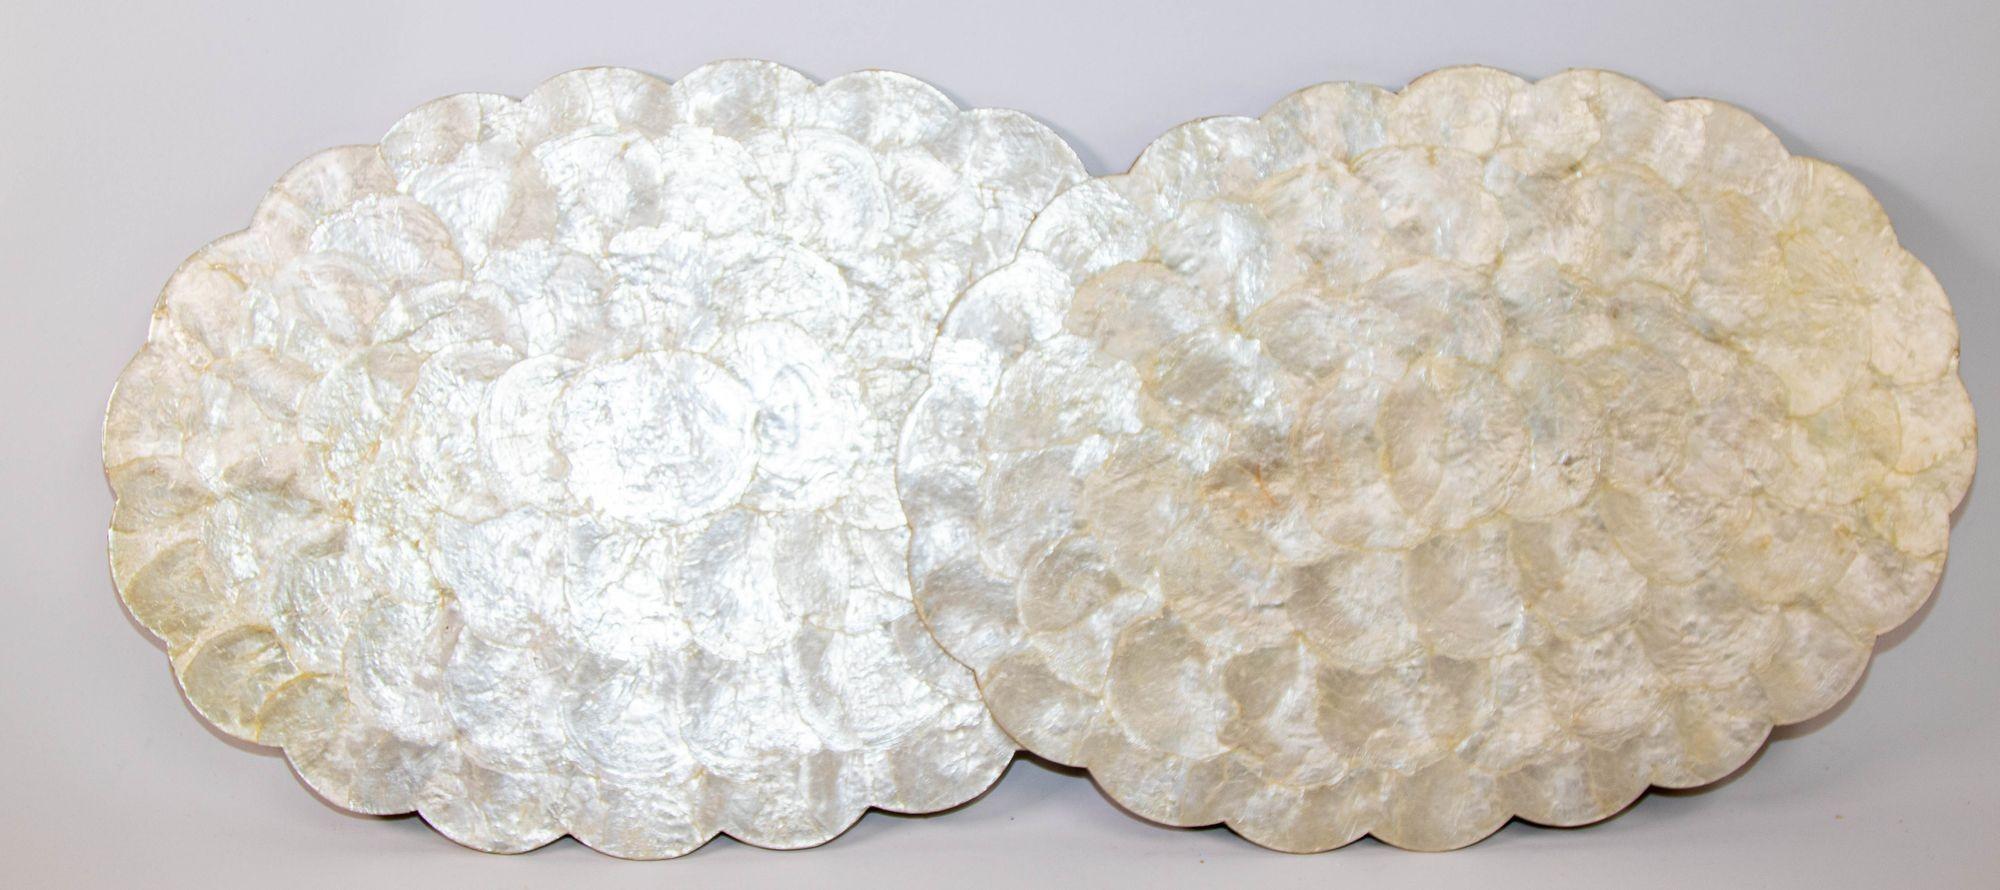 Organic Modern 1960s Hallie St Mary 2 Placemats in Natural Capiz Pearl Shell Scalloped Edge